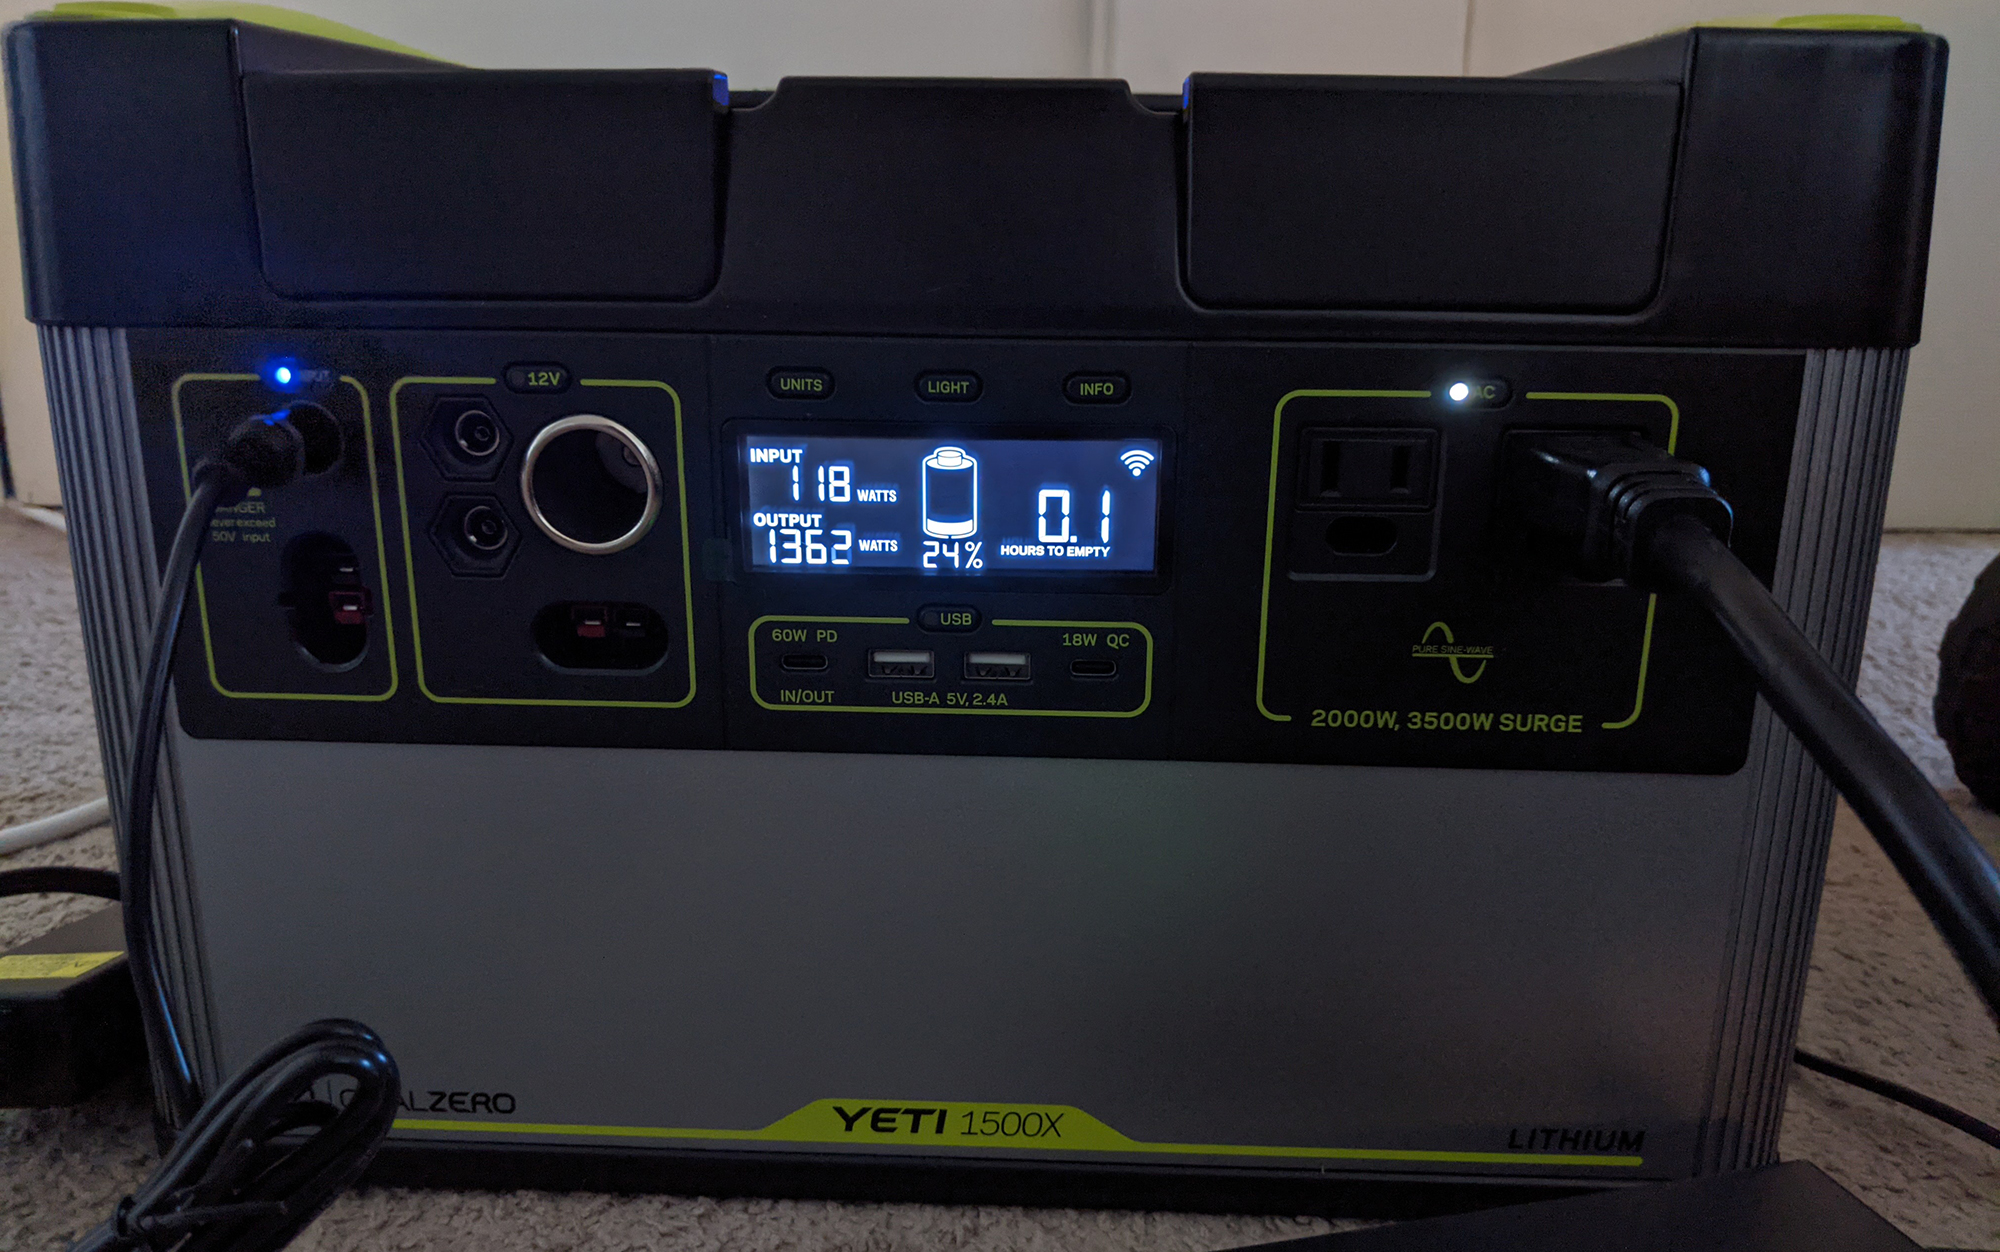 An output of 1362W was only a portion of the Yeti 1500Xâs 2000W capacity.